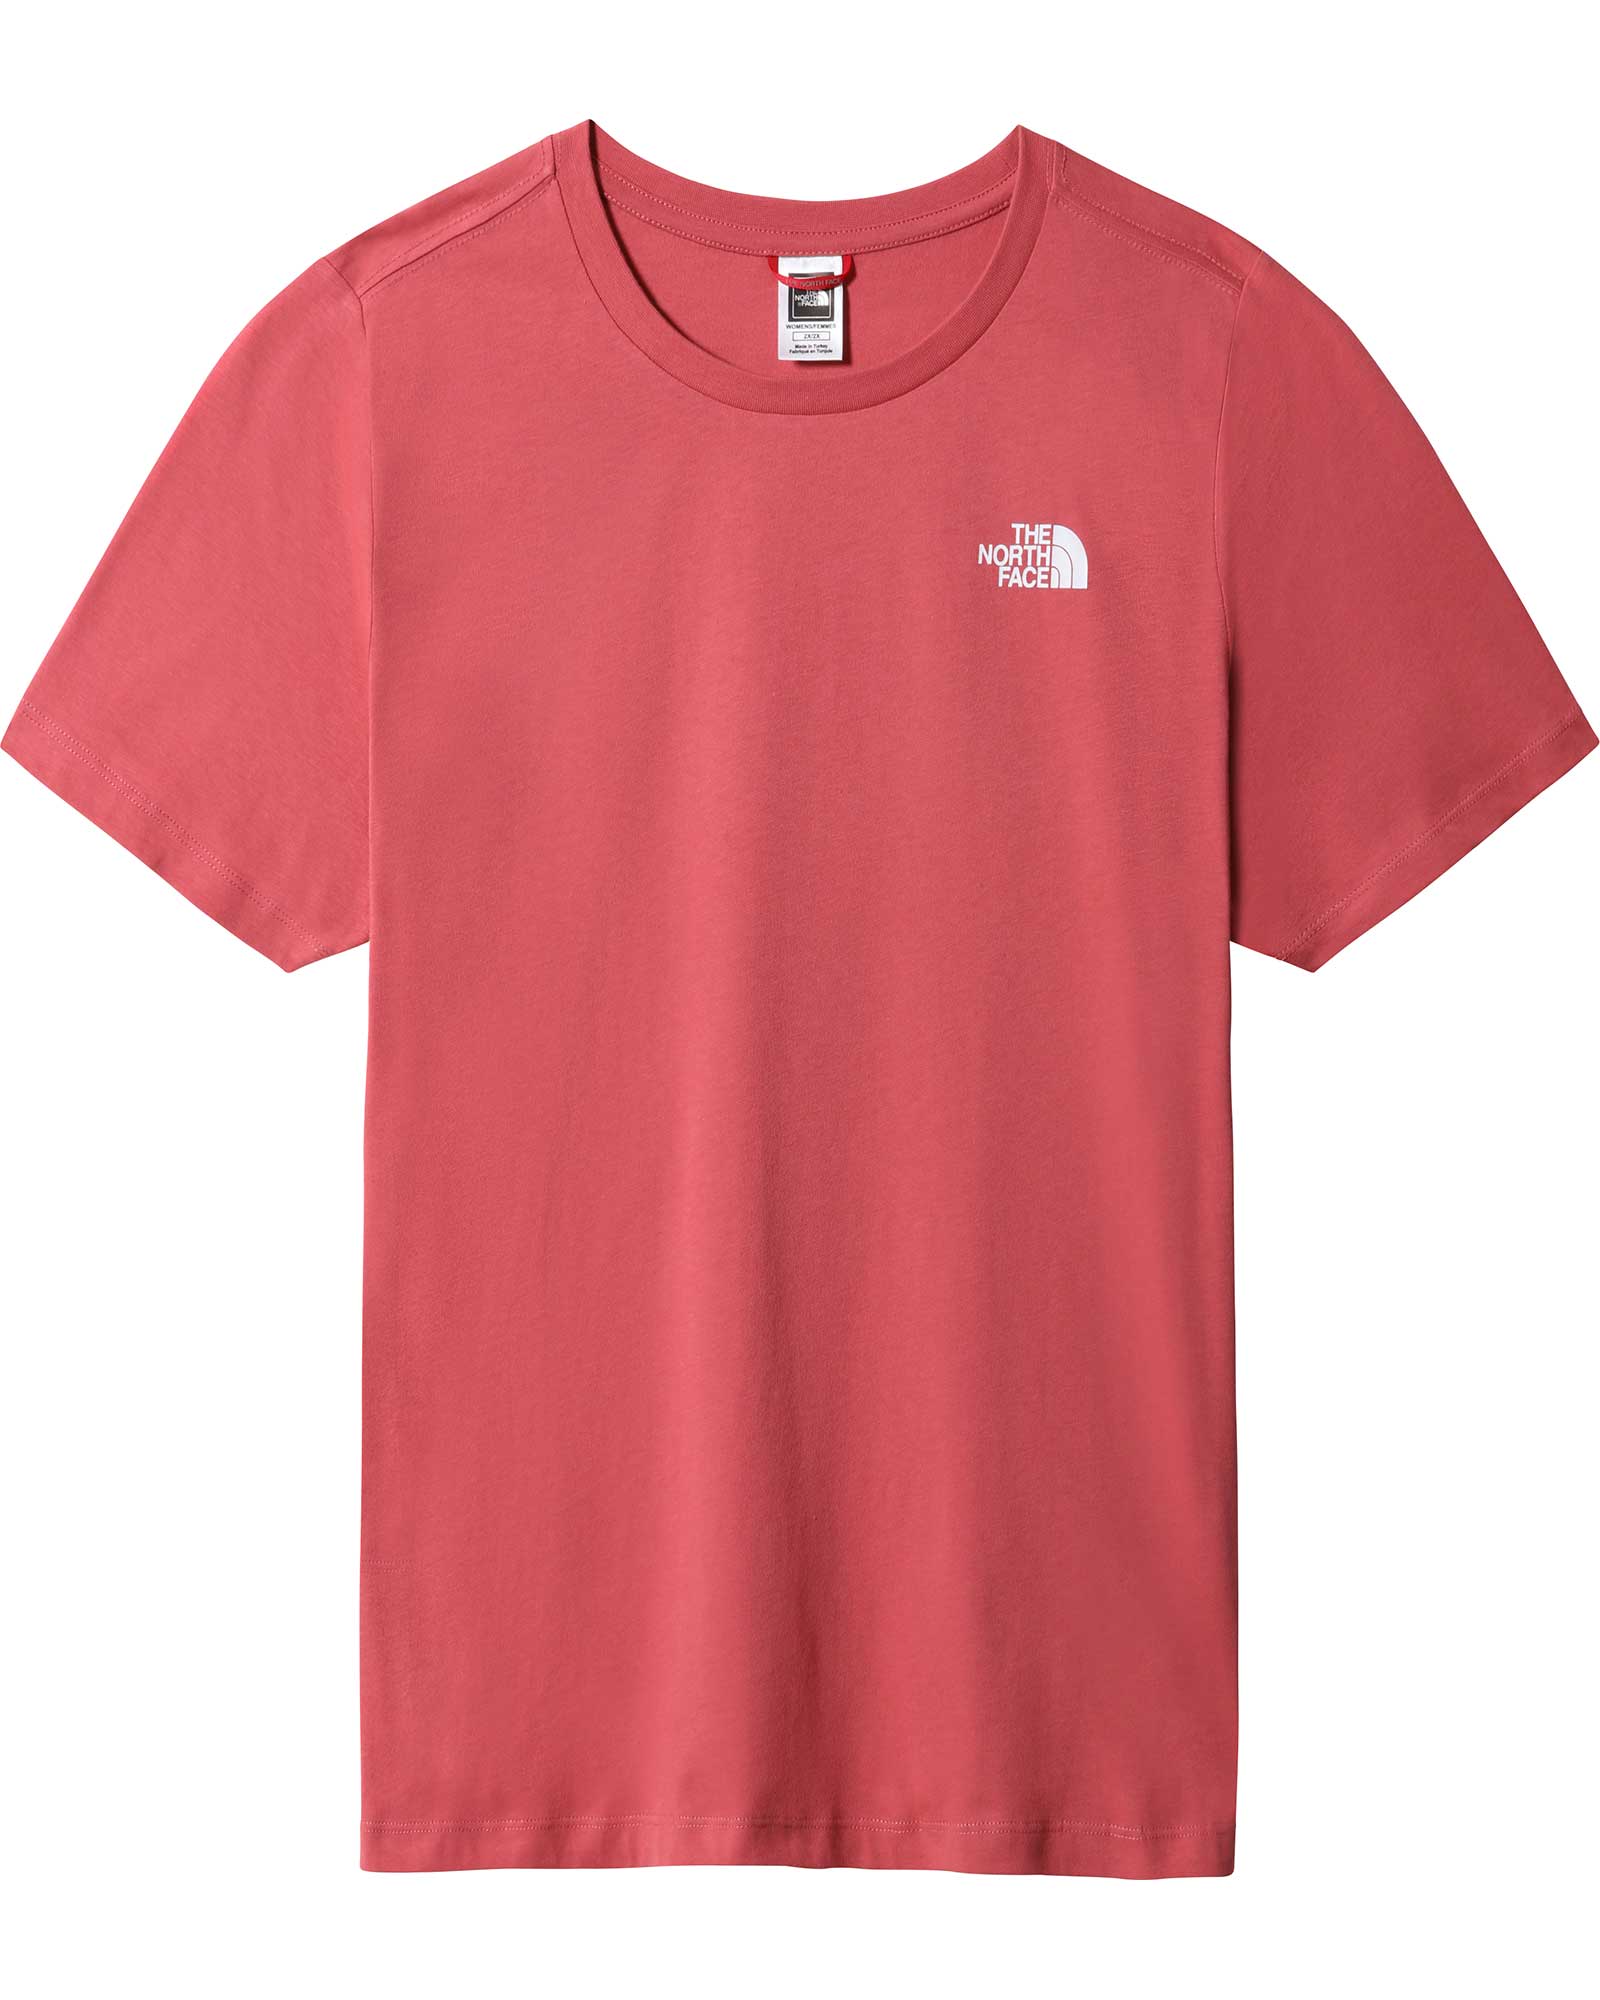 The North Face Plus Simple Dome Women’s T Shirt - Slate Rose 3X